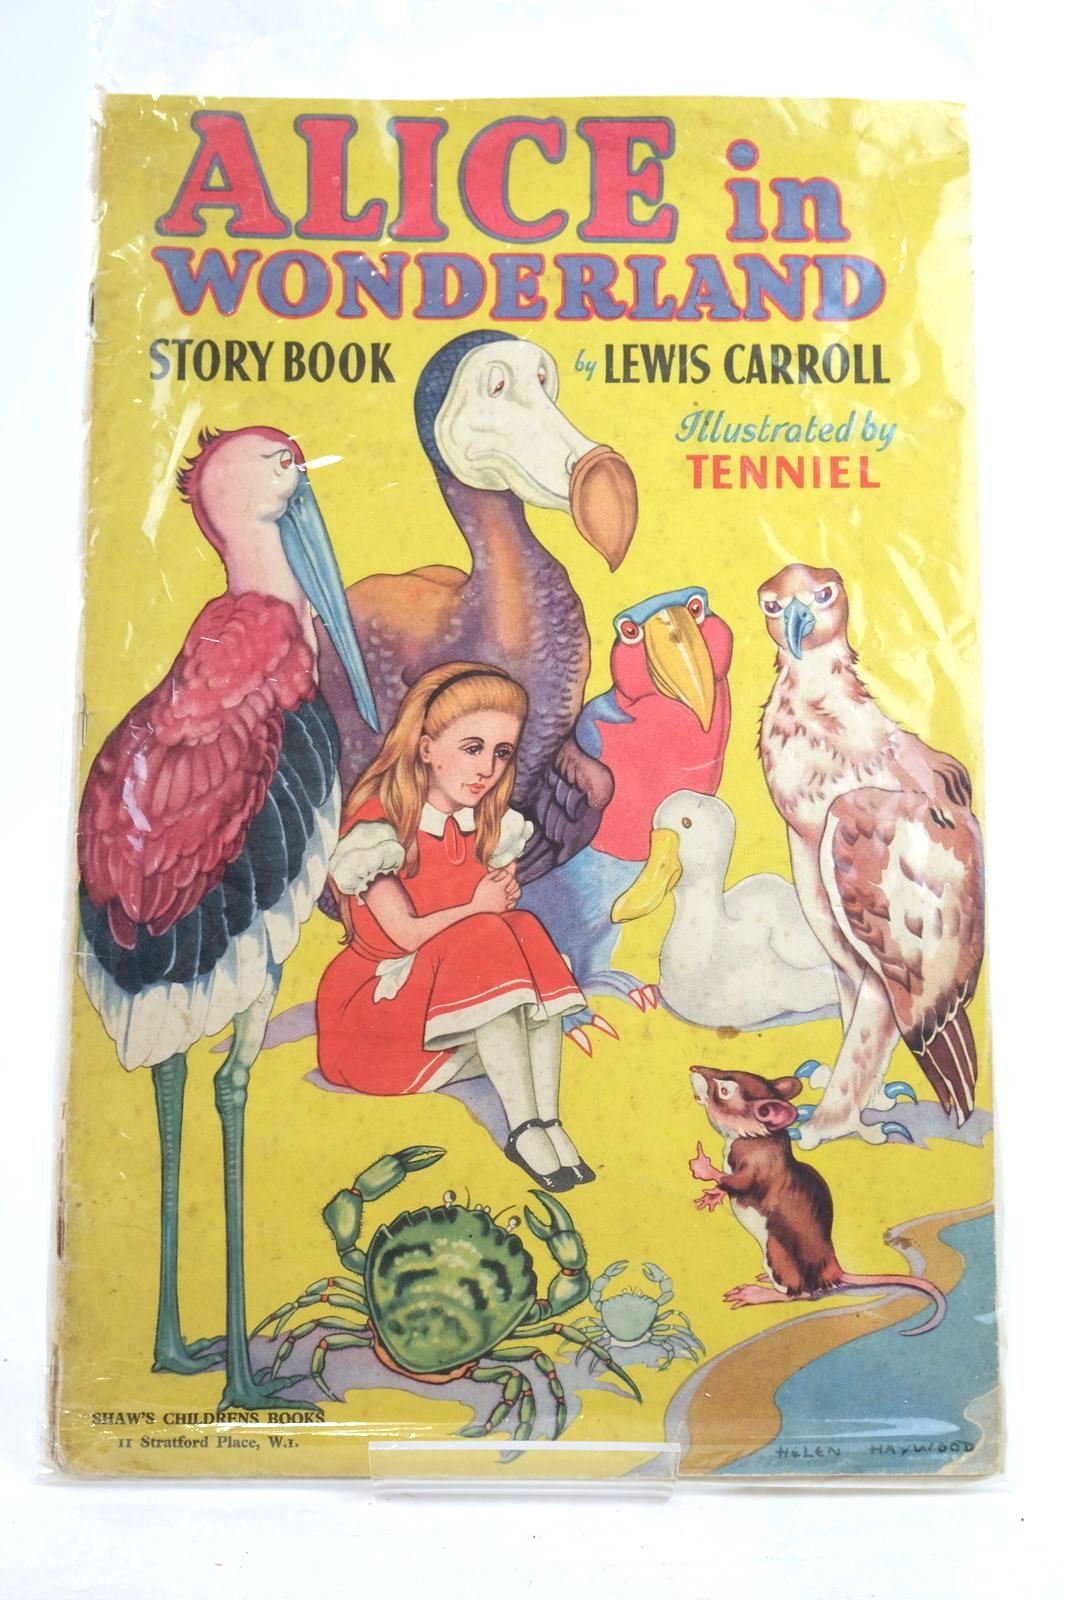 Photo of ALICE IN WONDERLAND STORY BOOK written by Carroll, Lewis illustrated by Tenniel, John Haywood, Helen published by Shaw's Children'S Books (STOCK CODE: 1320063)  for sale by Stella & Rose's Books